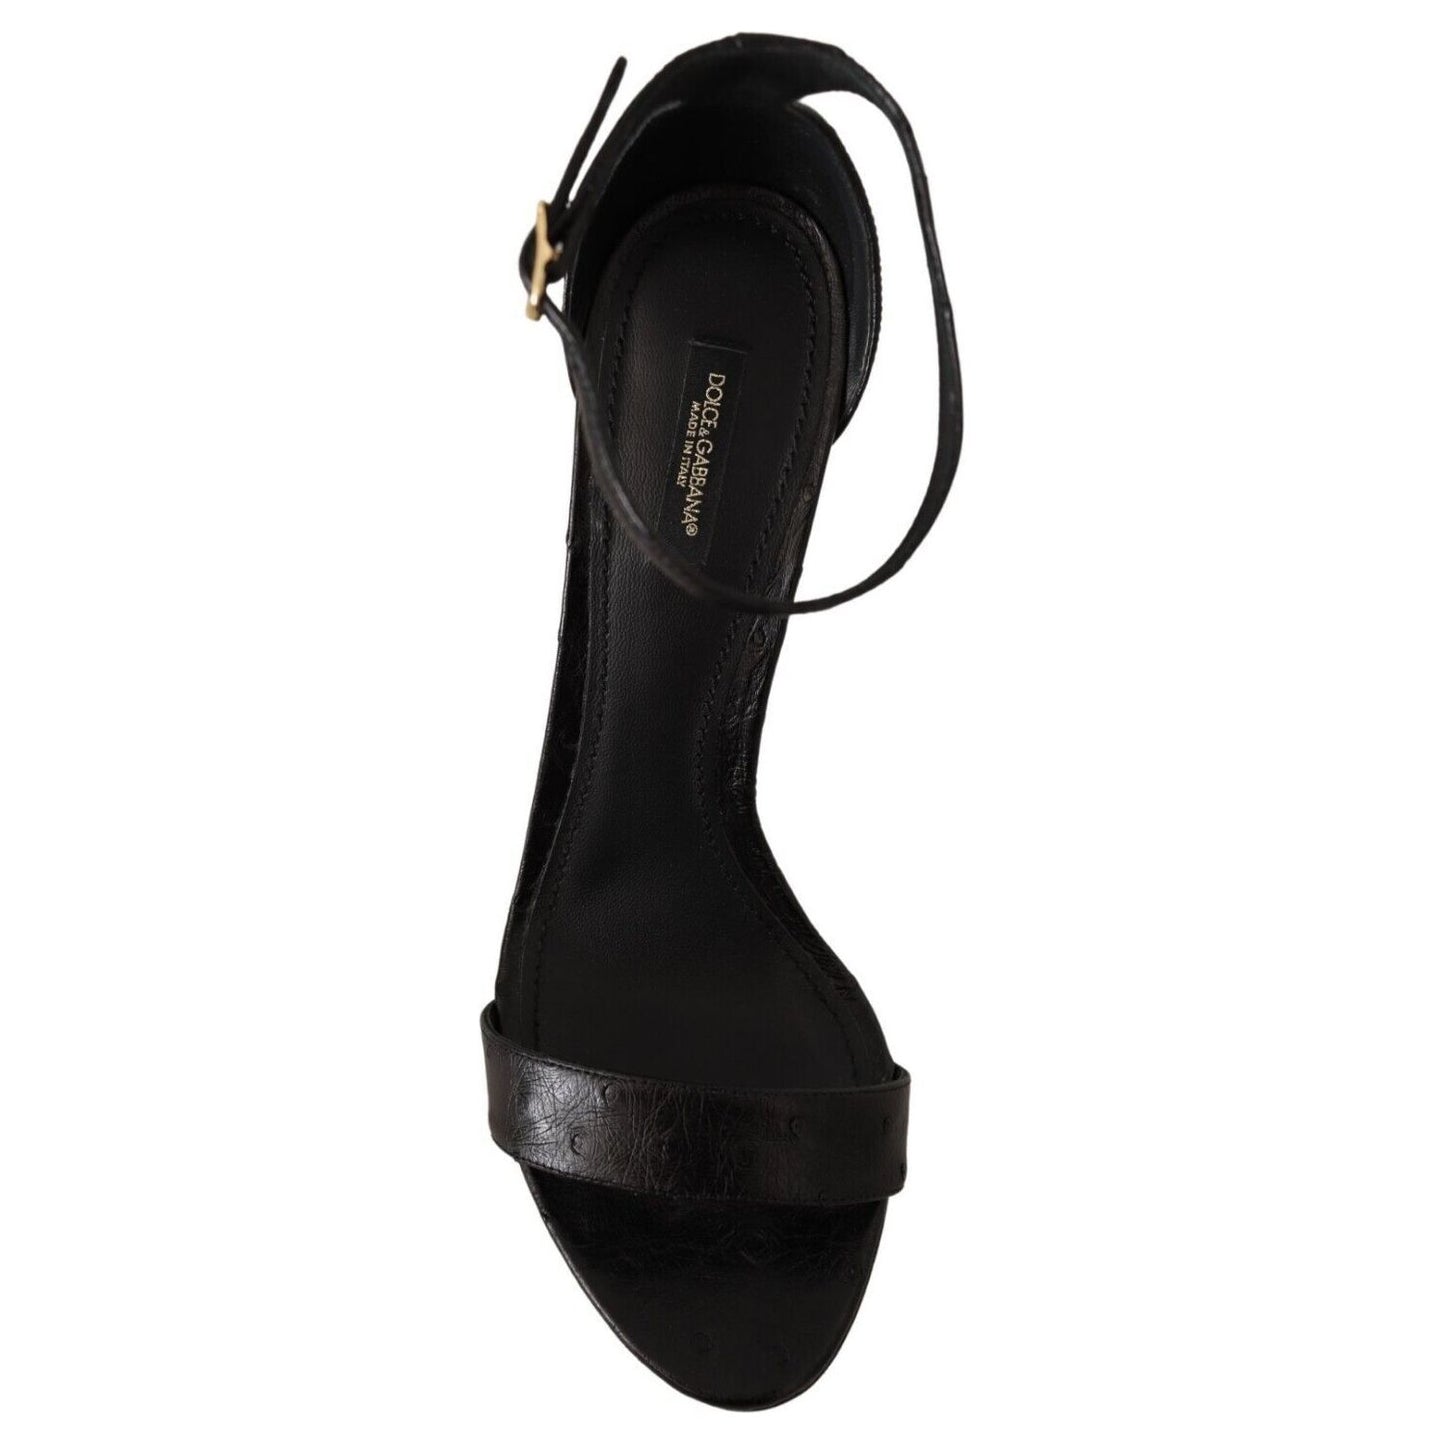 Dolce & Gabbana Elegant Ostrich Leather Ankle Strap Heels black-ostrich-ankle-strap-heels-sandals-shoes